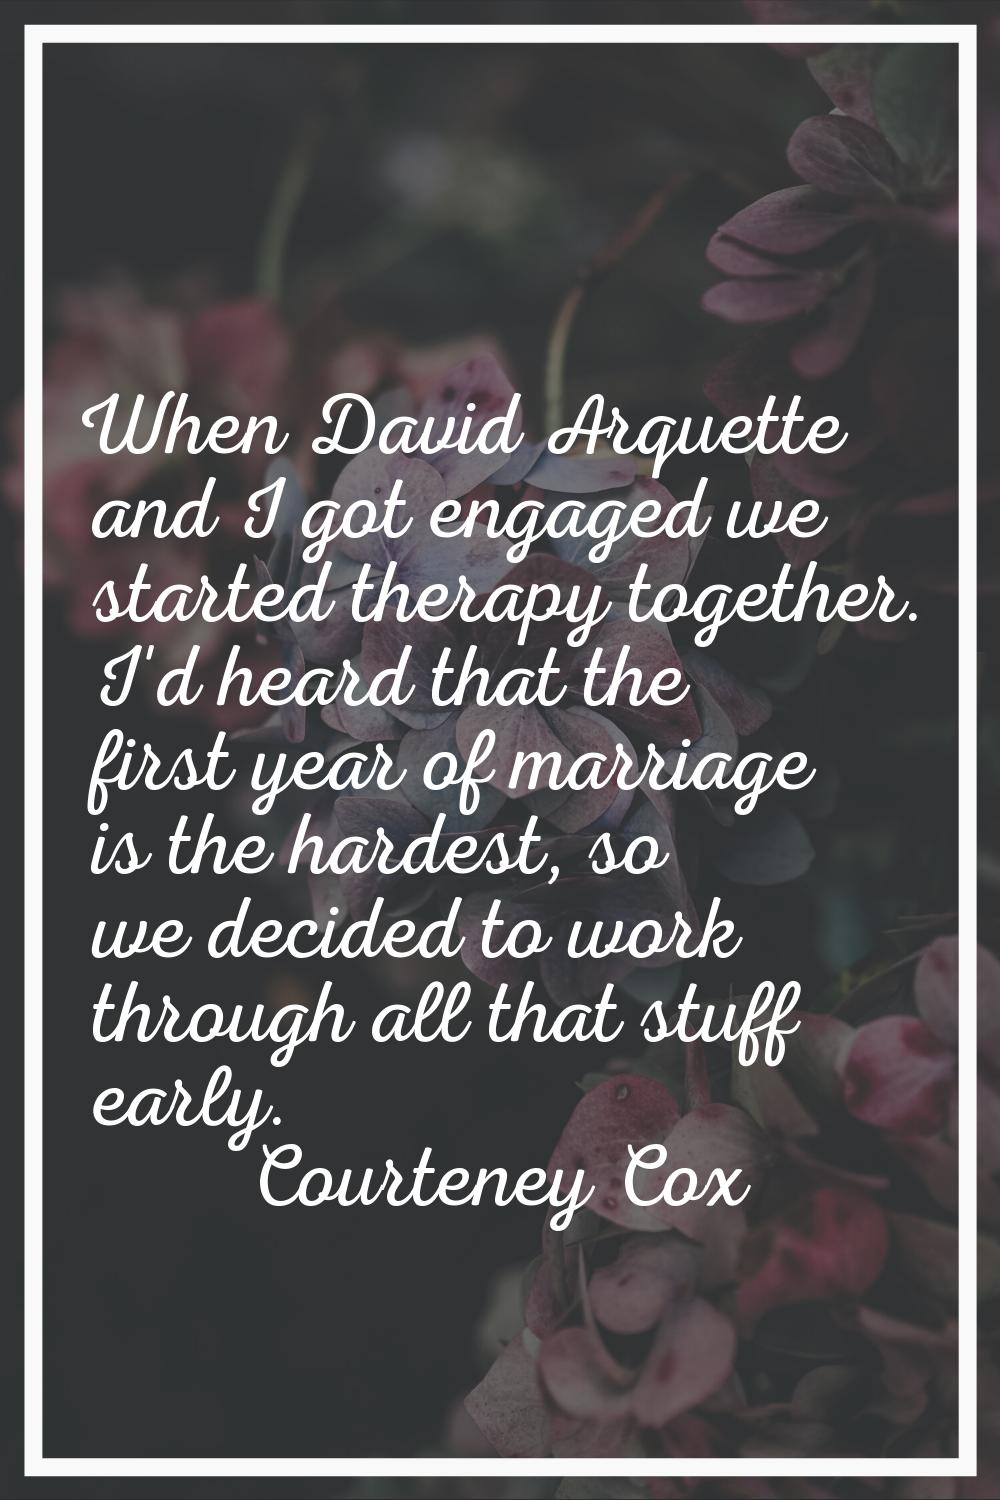 When David Arquette and I got engaged we started therapy together. I'd heard that the first year of